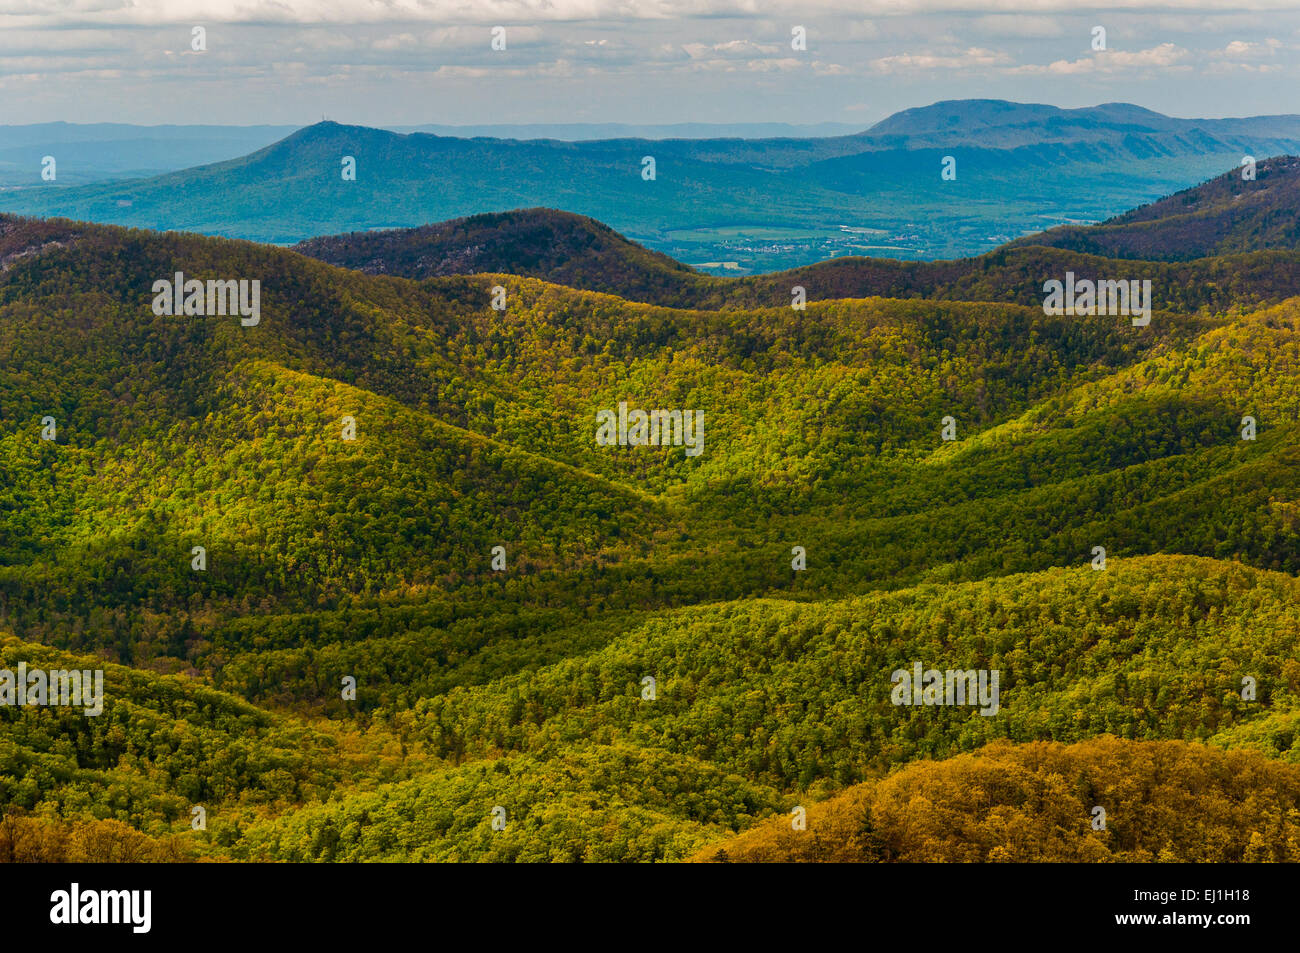 Spring colors in the Appalachian Mountains, seen from Blackrock Summit in Shenandoah National Park, Virginia. Stock Photo